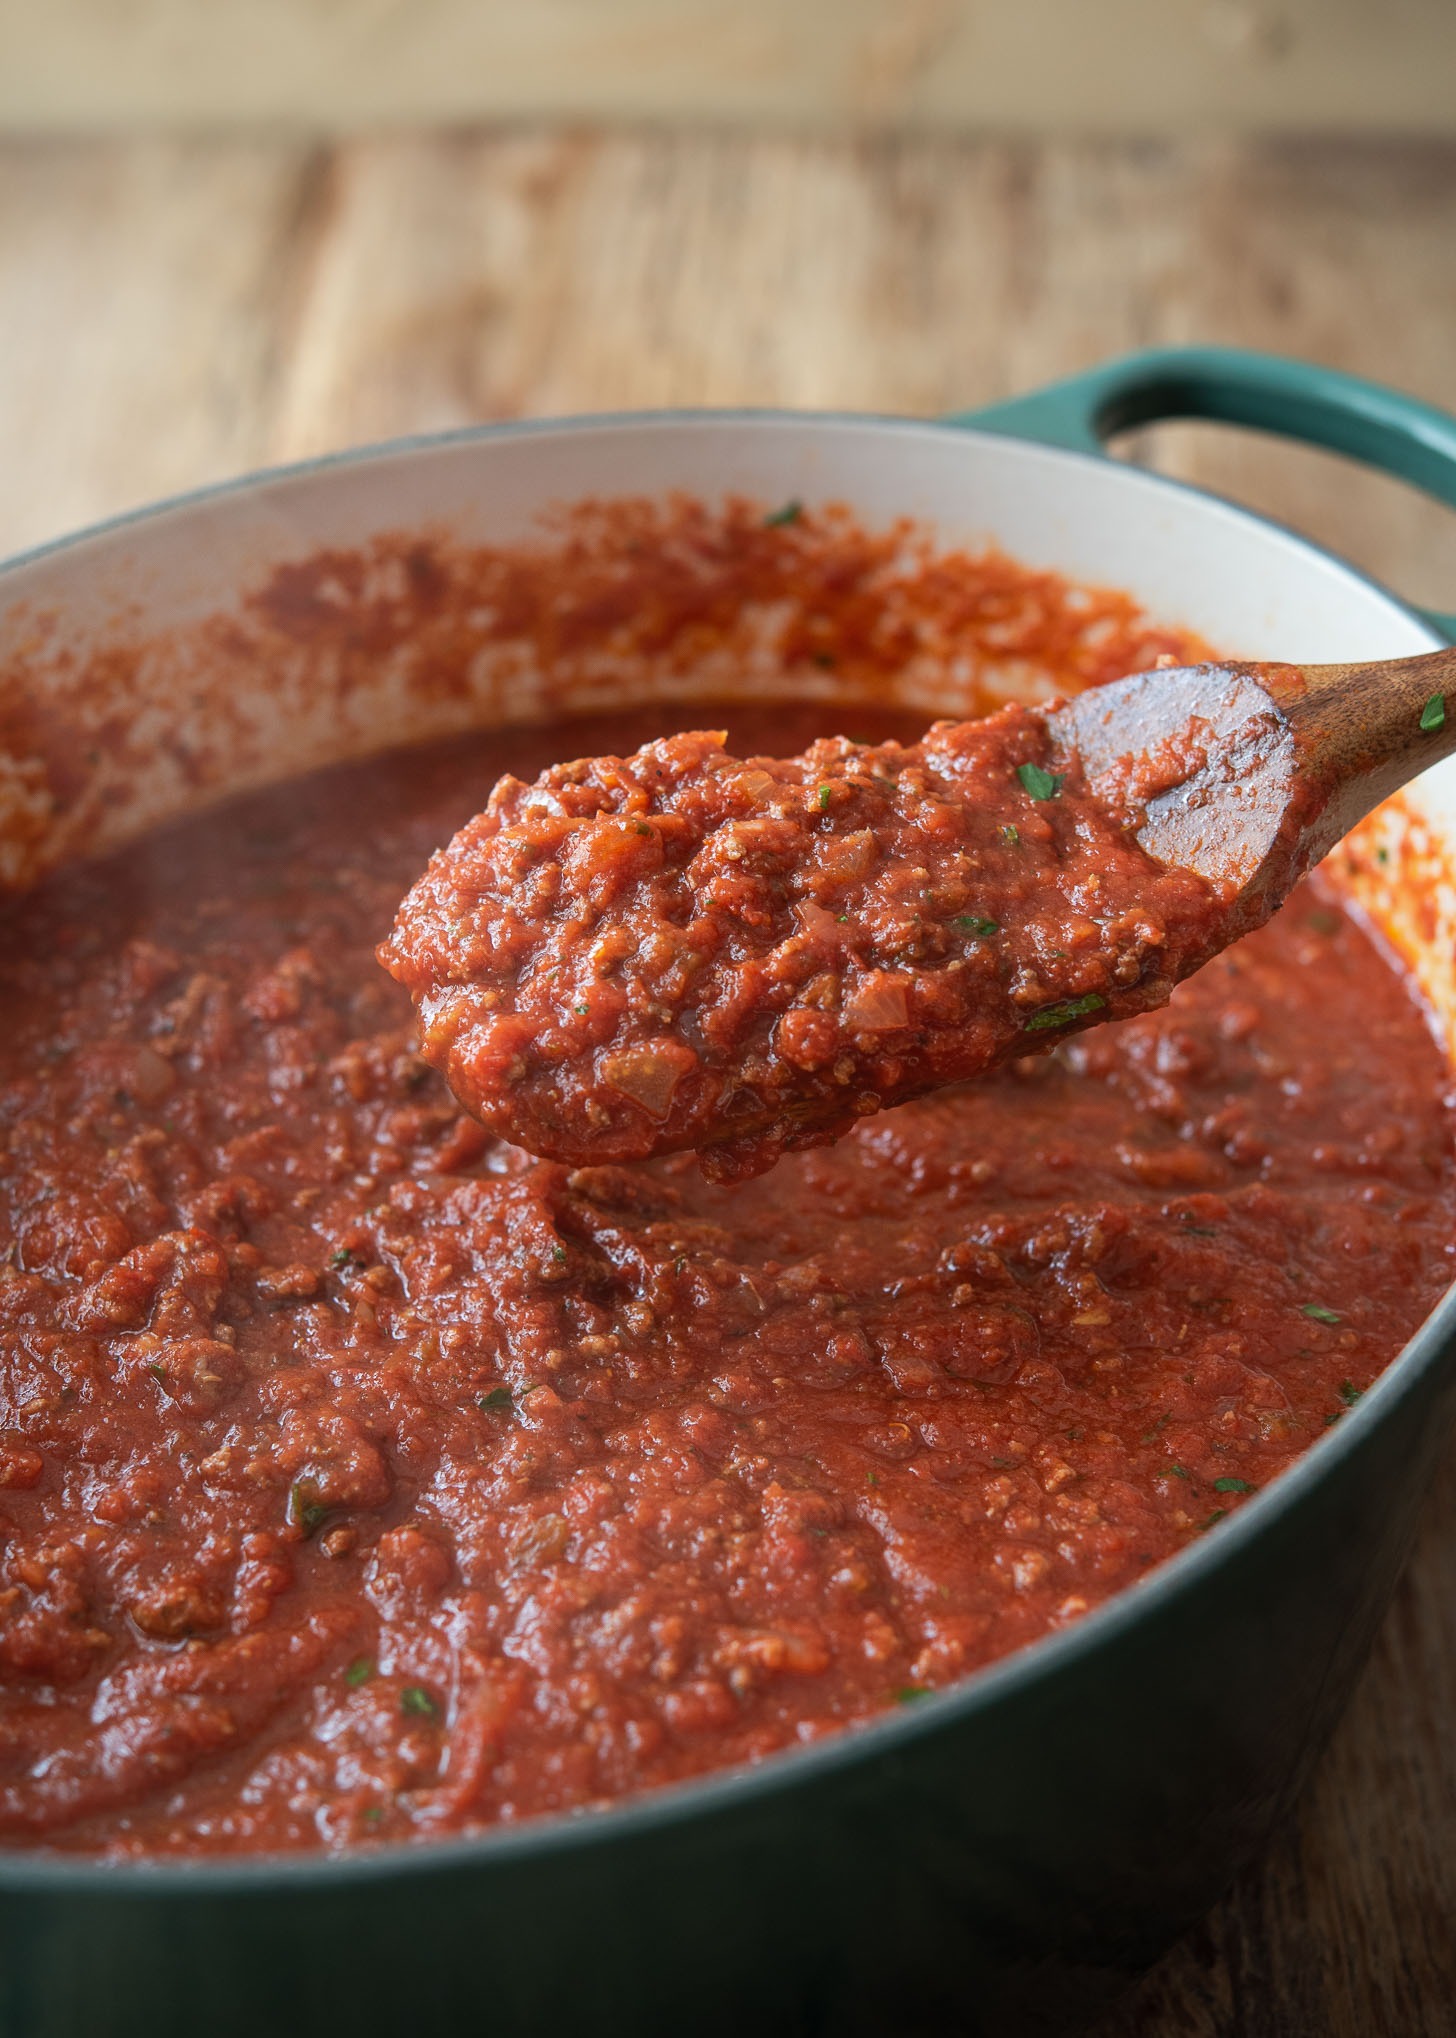 This homemade spaghetti sauce is thick and hearty.